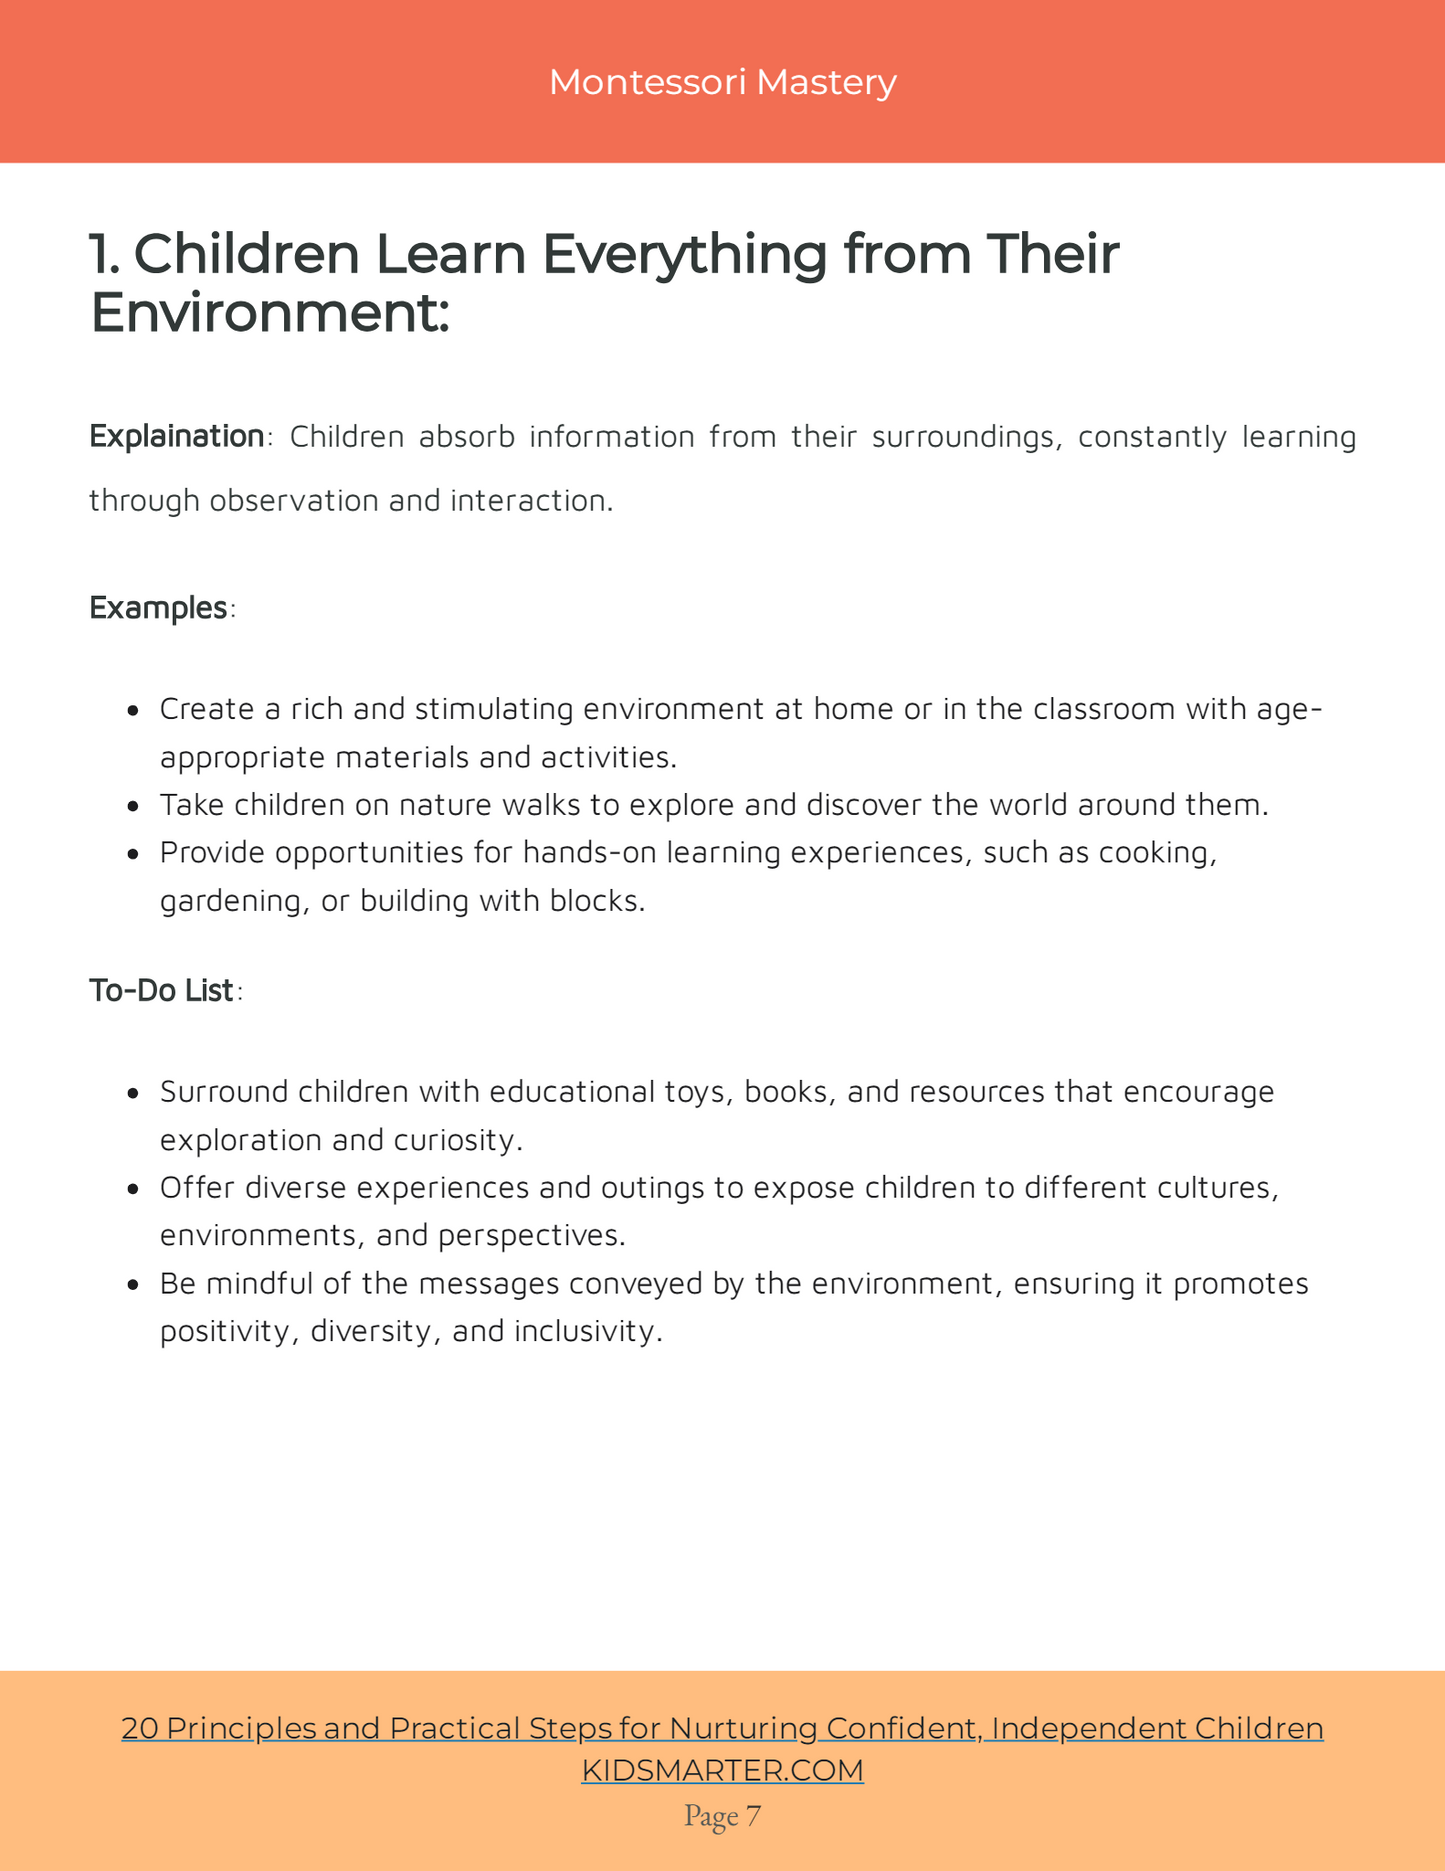 Montessori Mastery: Empowering Parents with Practical Principles for Positive Parenting, 32 pages, Ebook